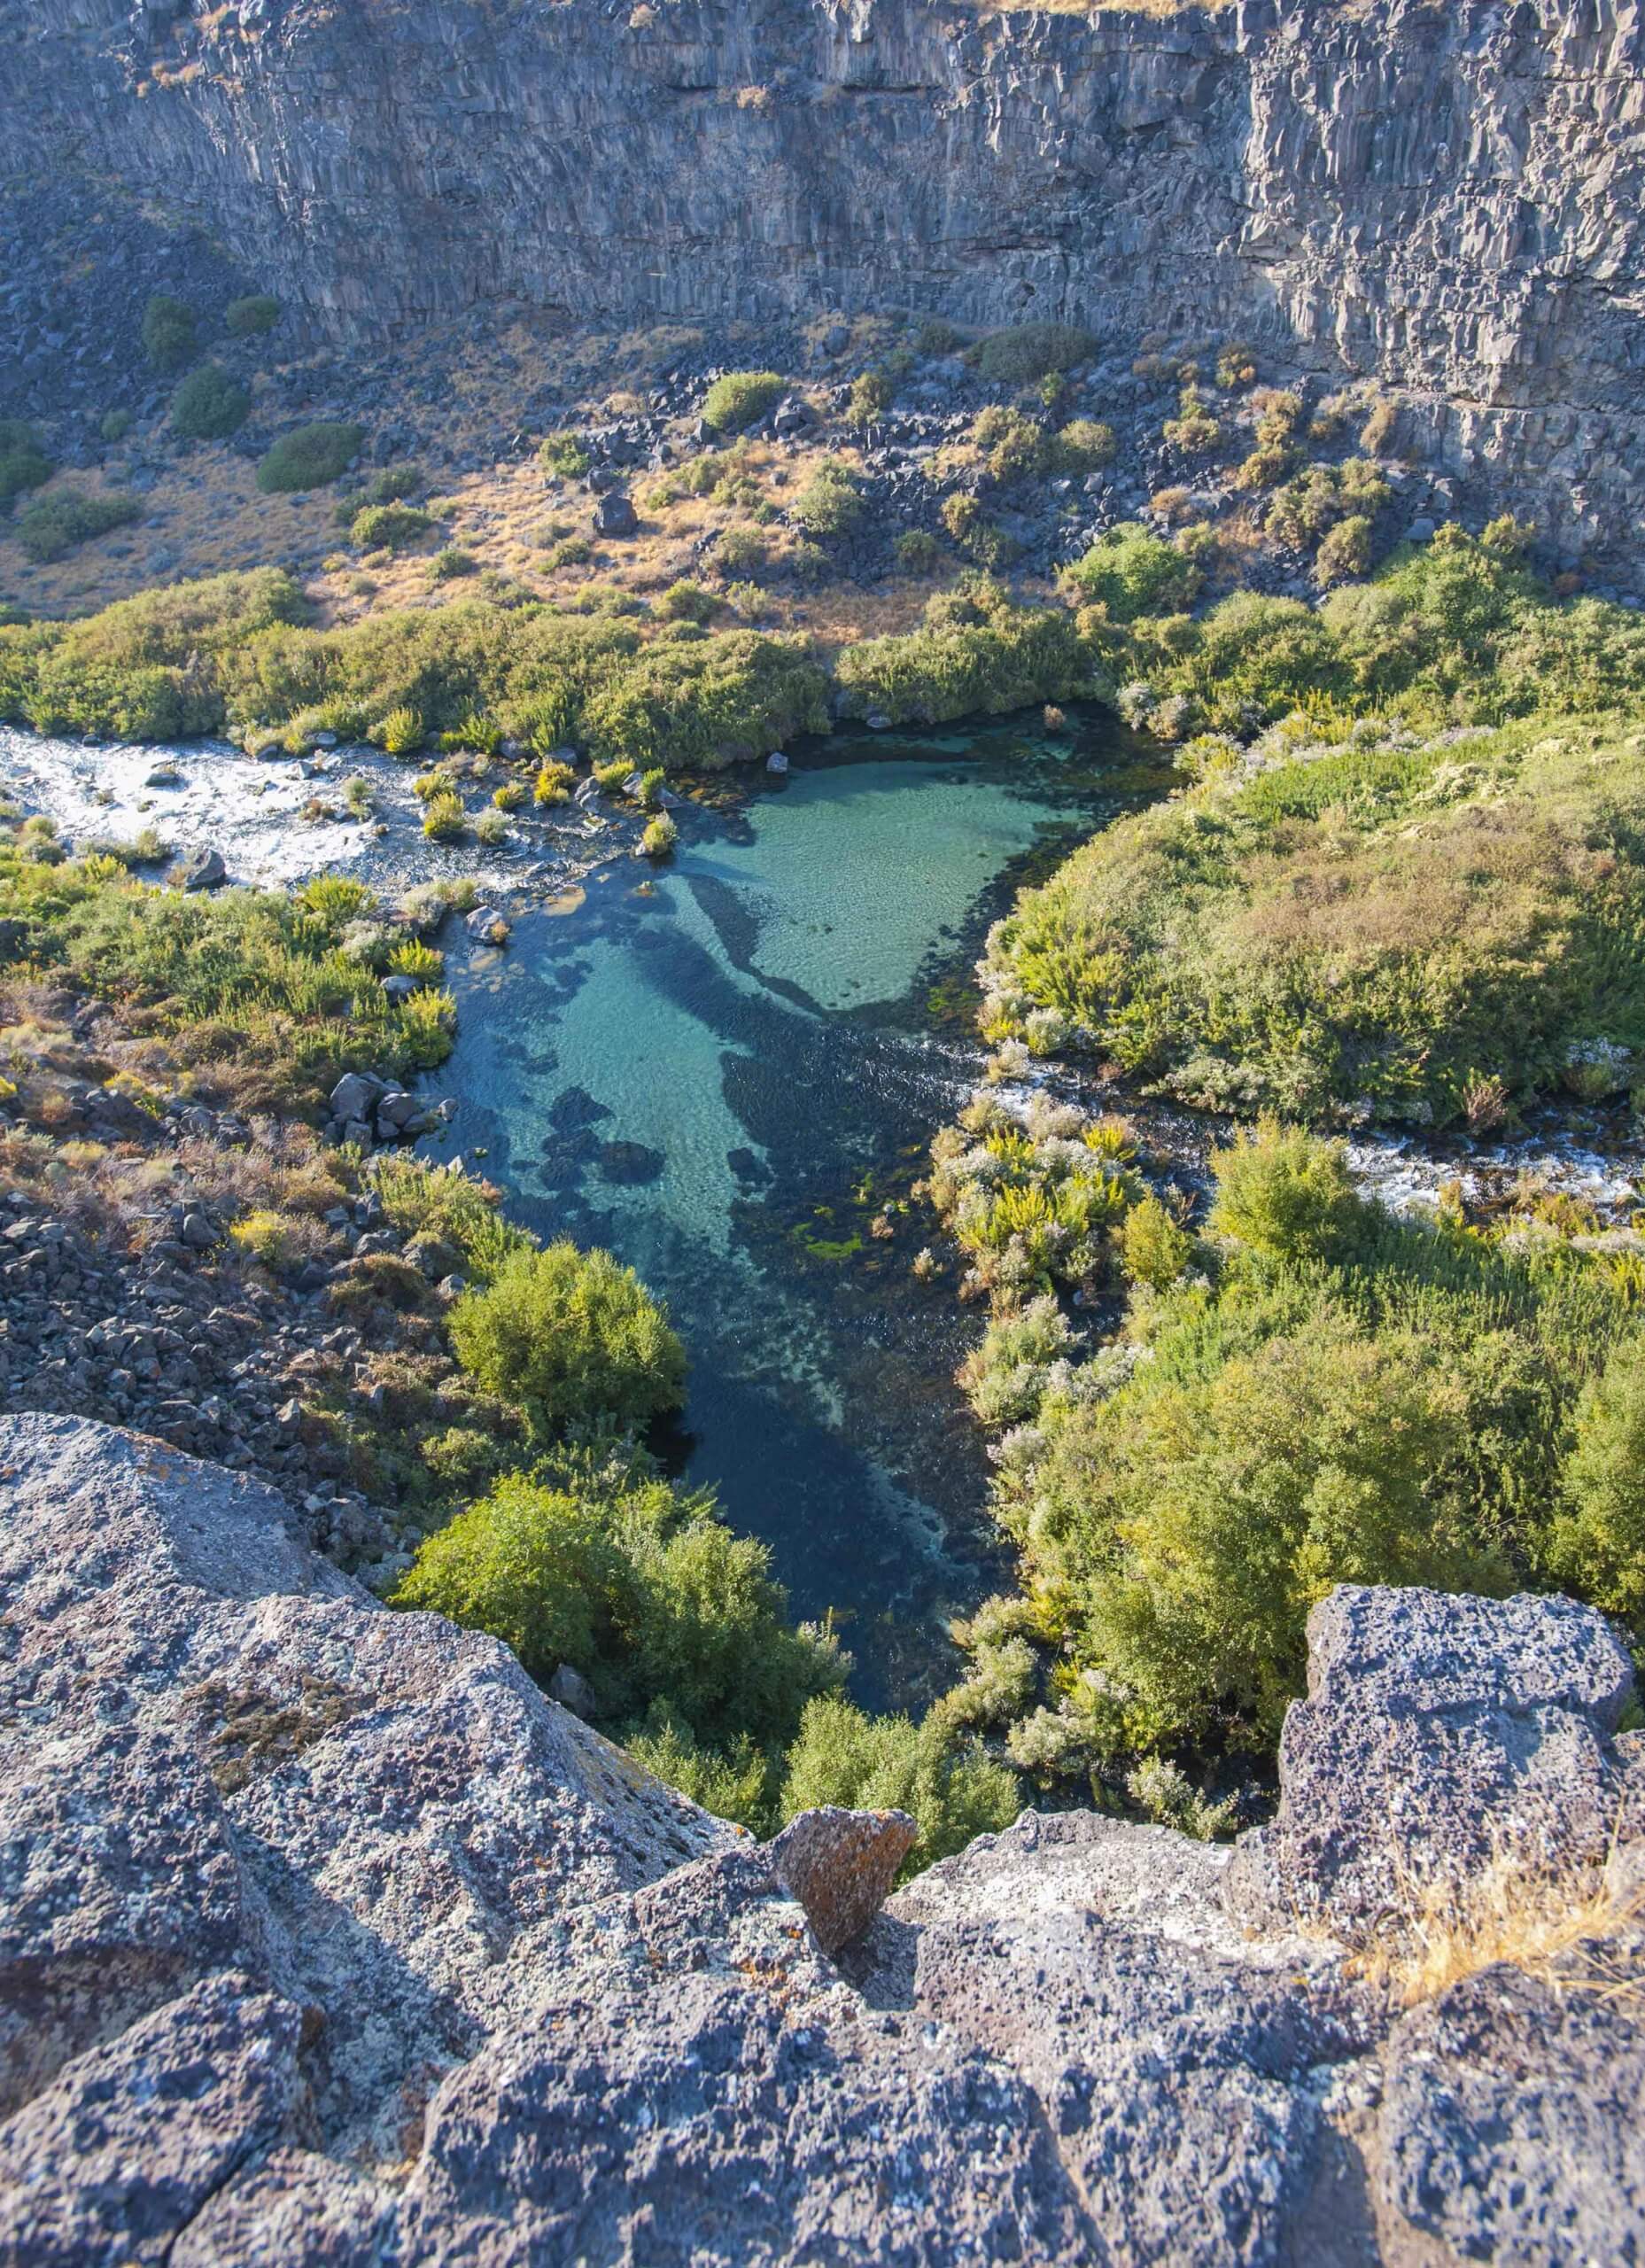 An overhead view of a body of water surrounded by trees and rock formations in Earl M. Hardy Box Canyon Springs Nature Preserve.